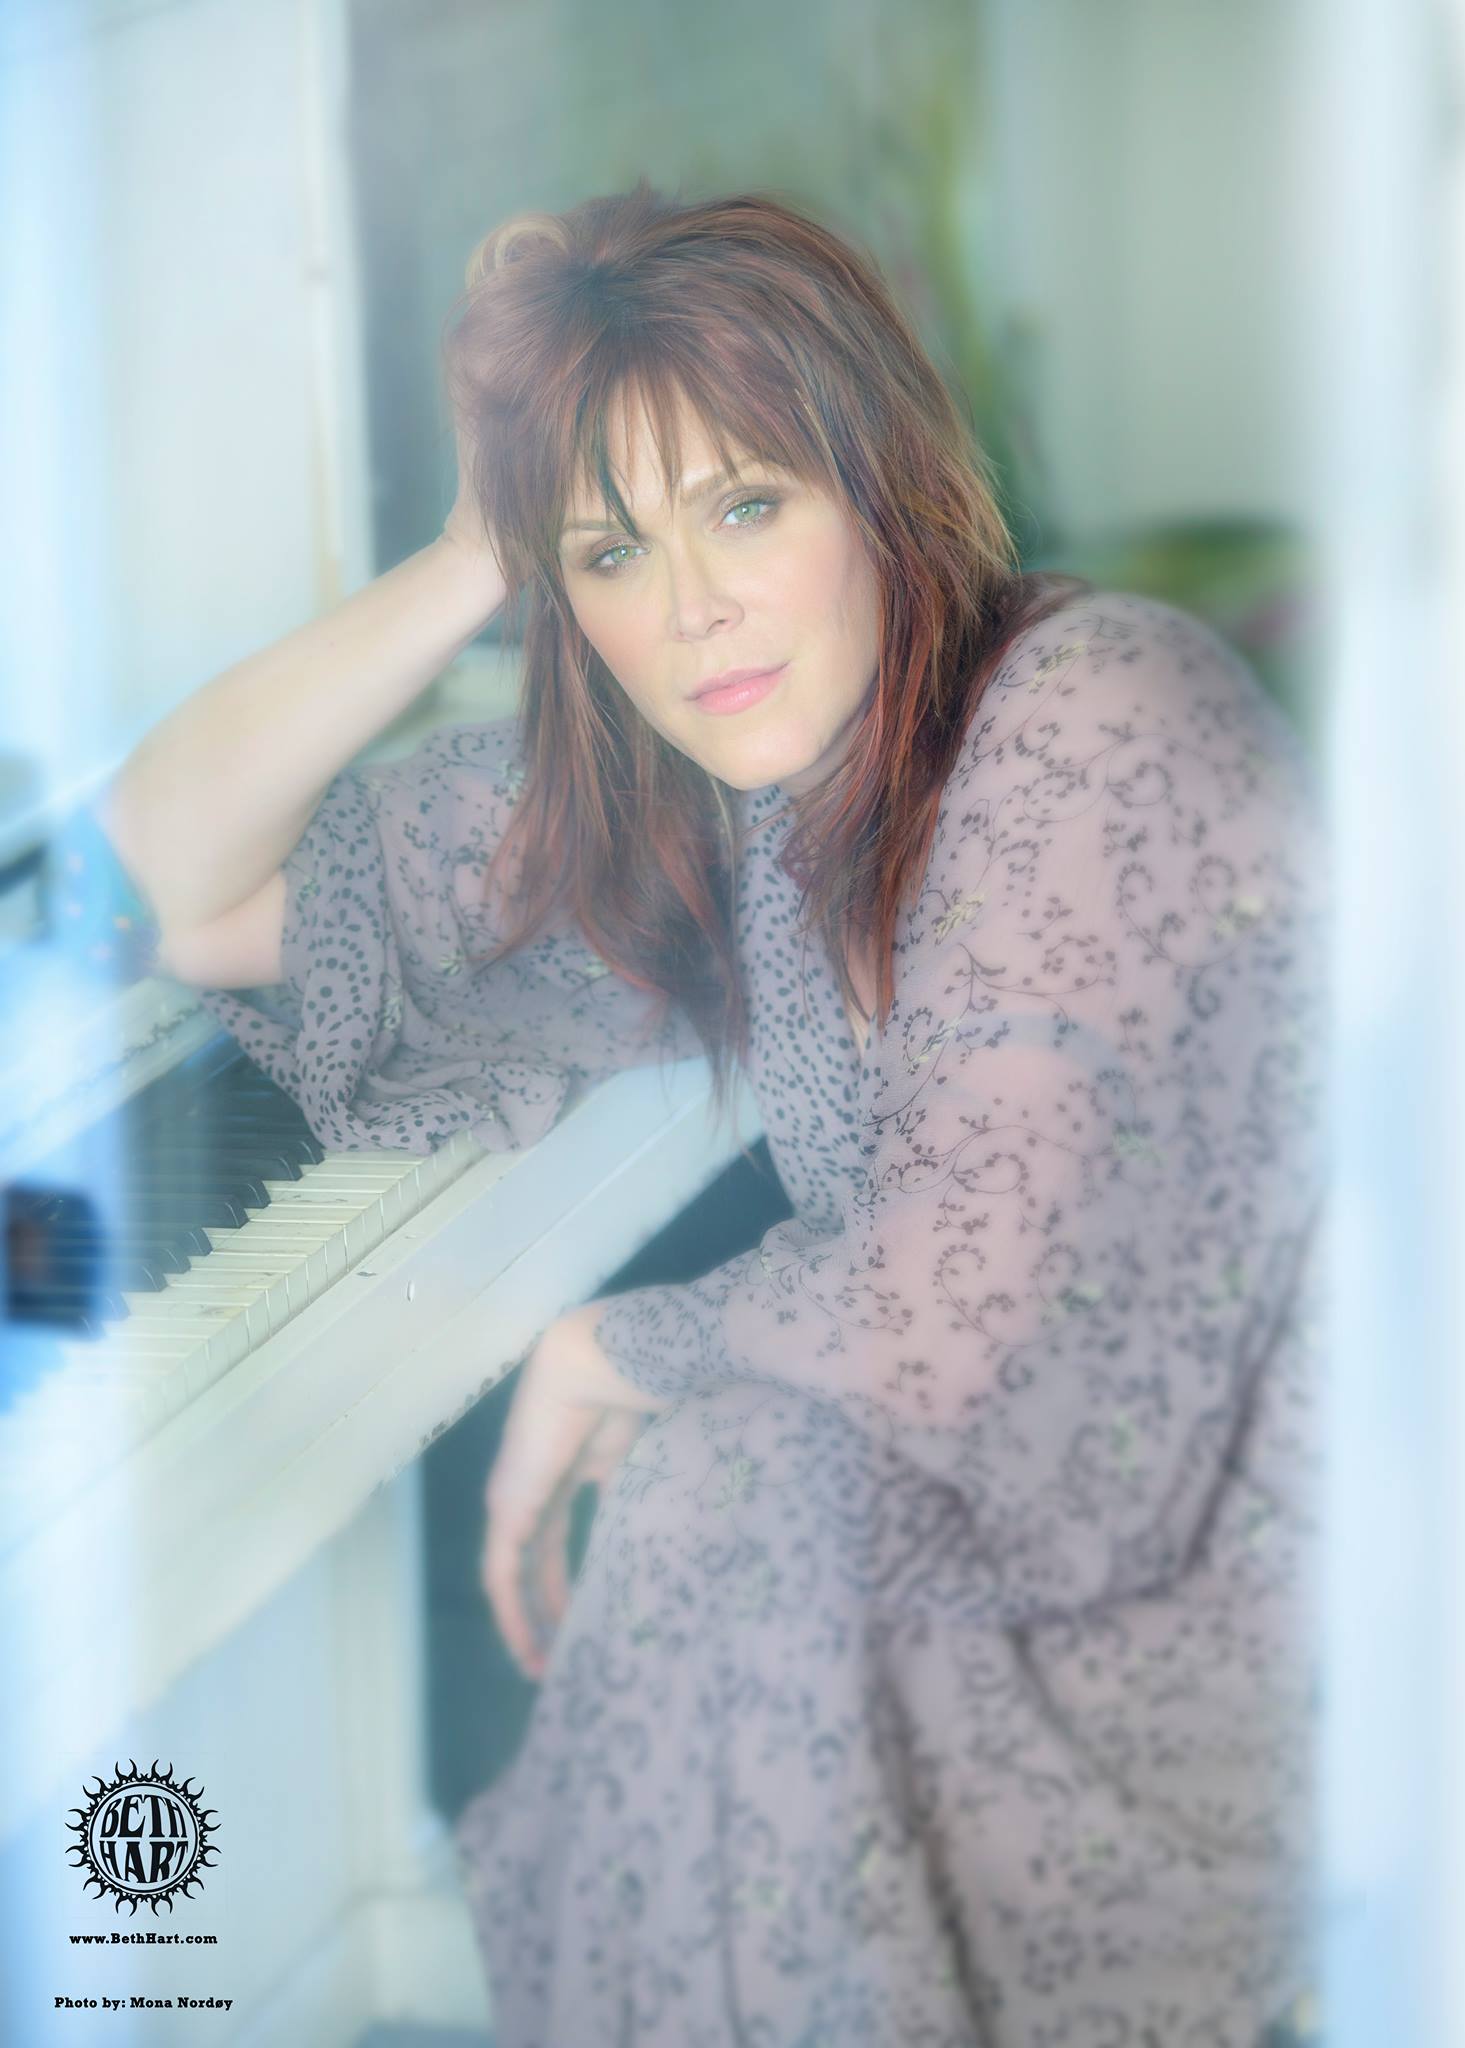 photo of Beth Hart by Mona Nordoy